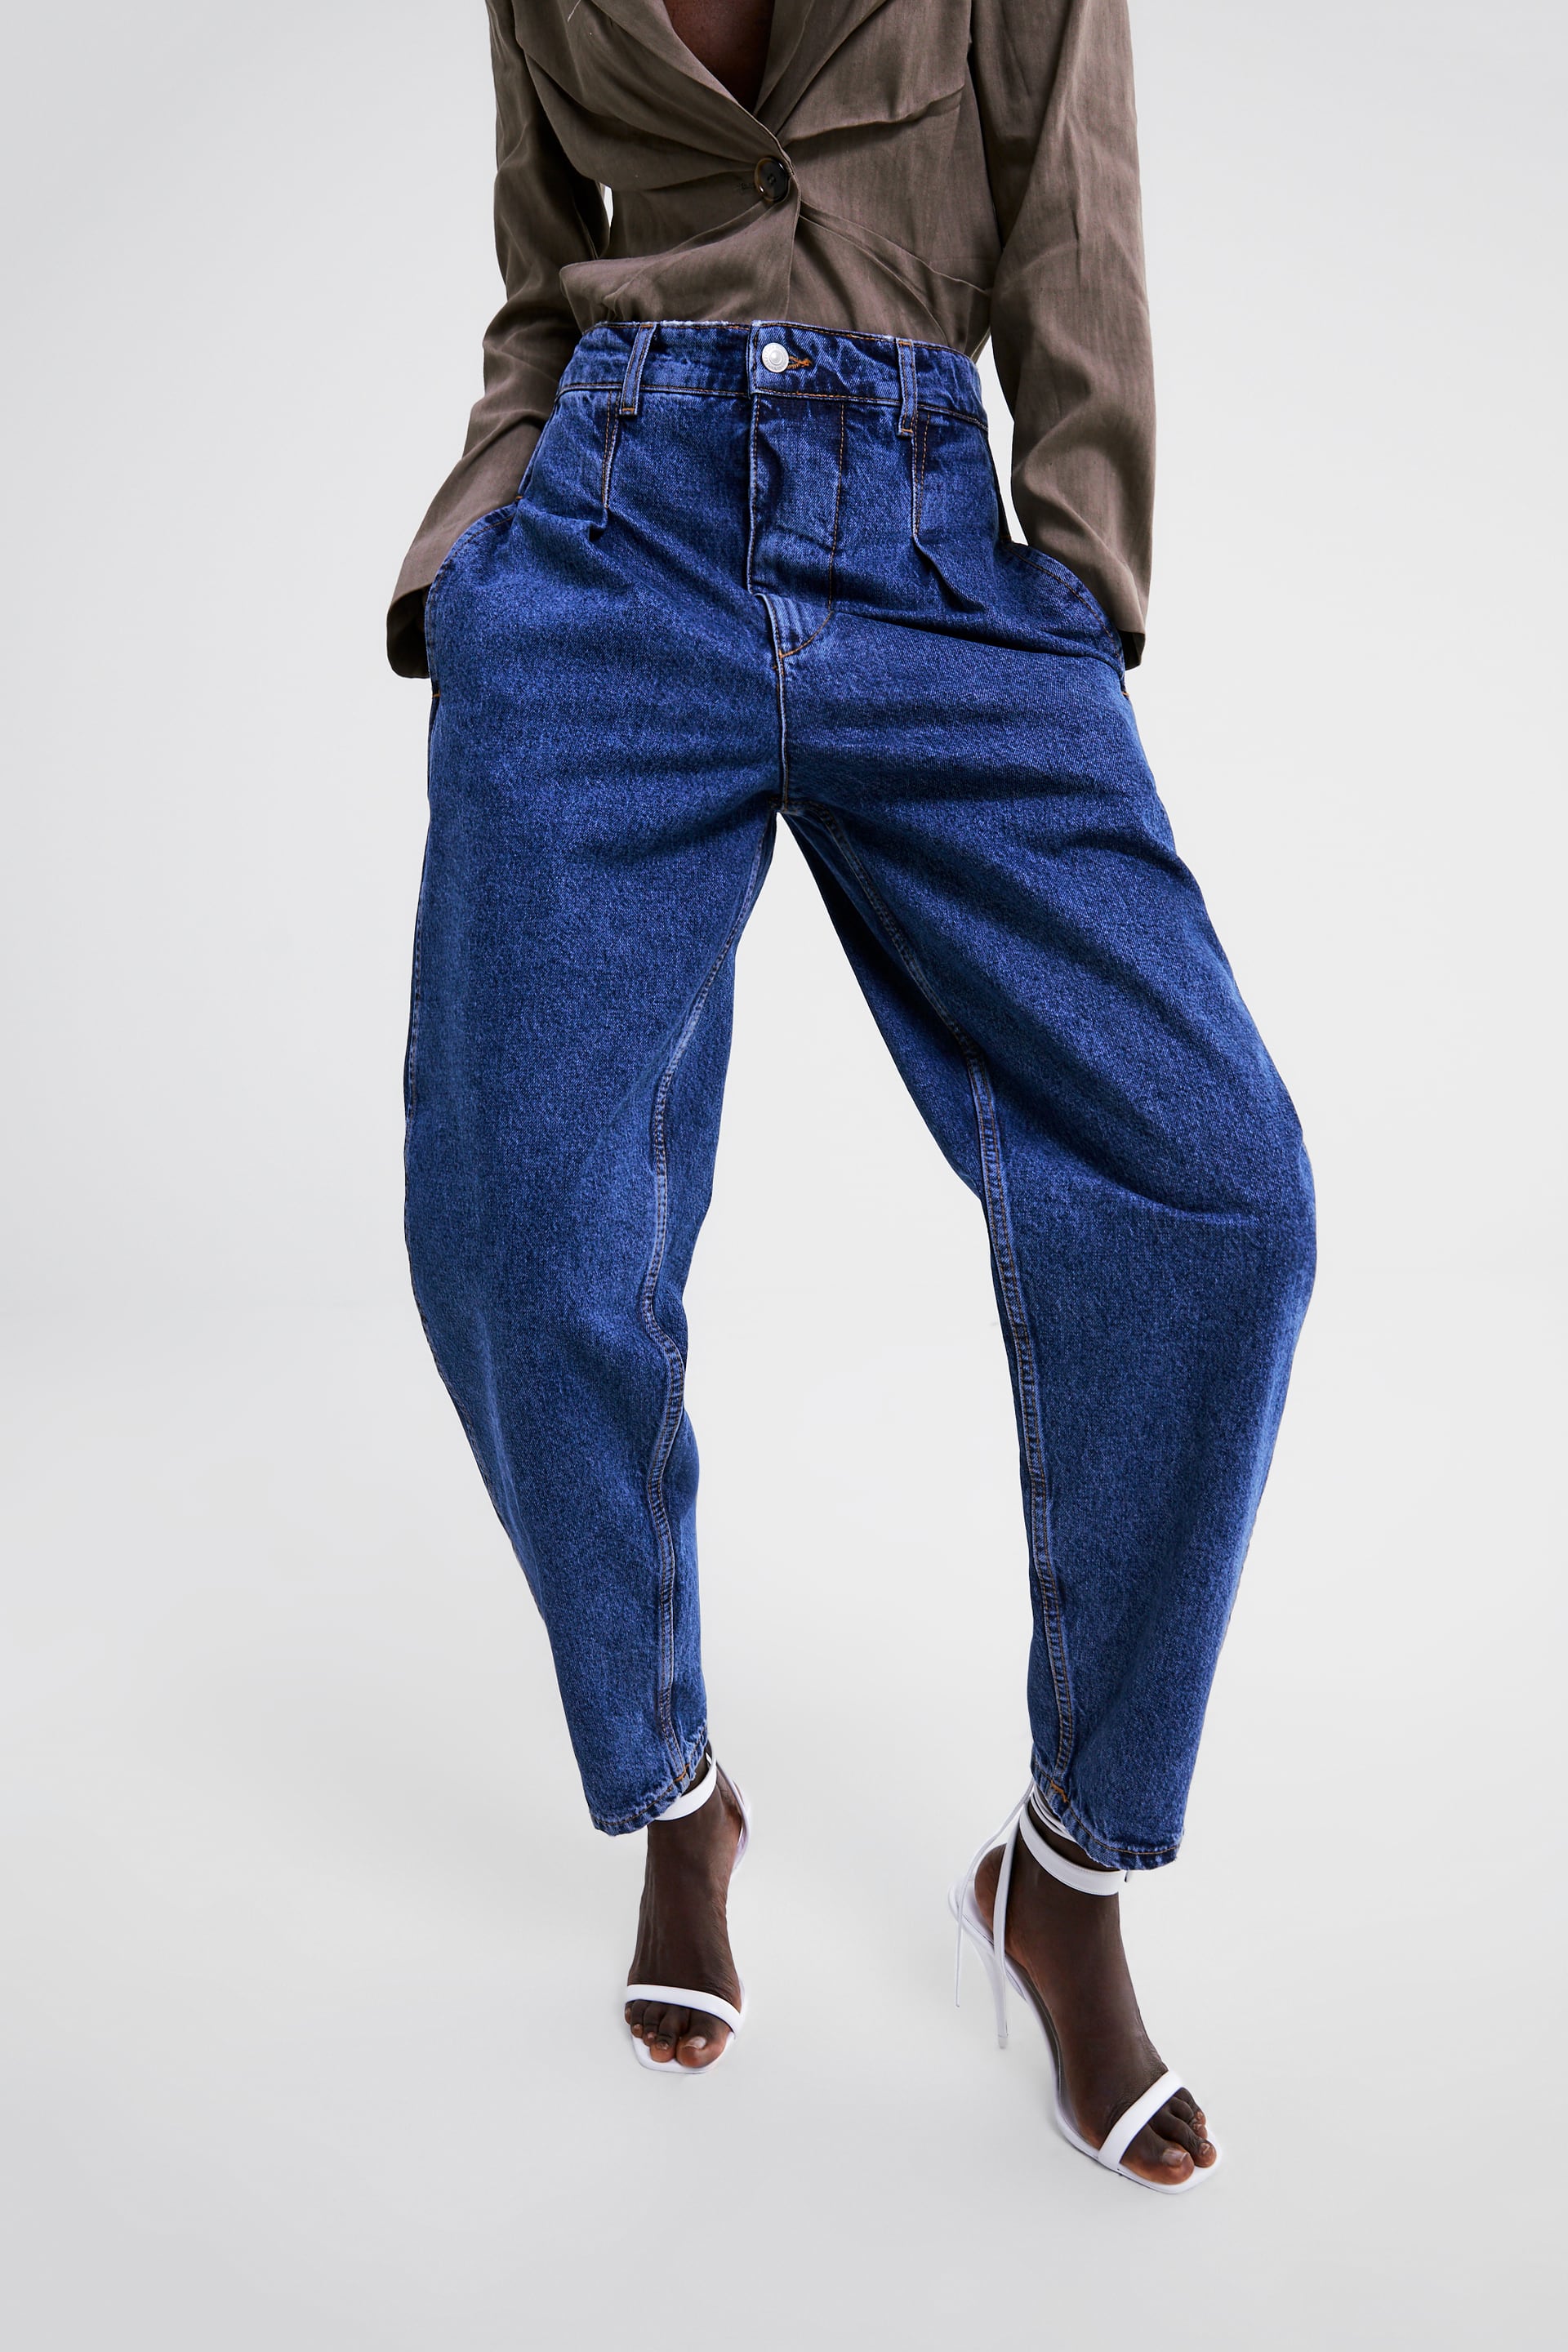 The 5 Most Popular 2019 Denim Trends at Zara | Who What Wear